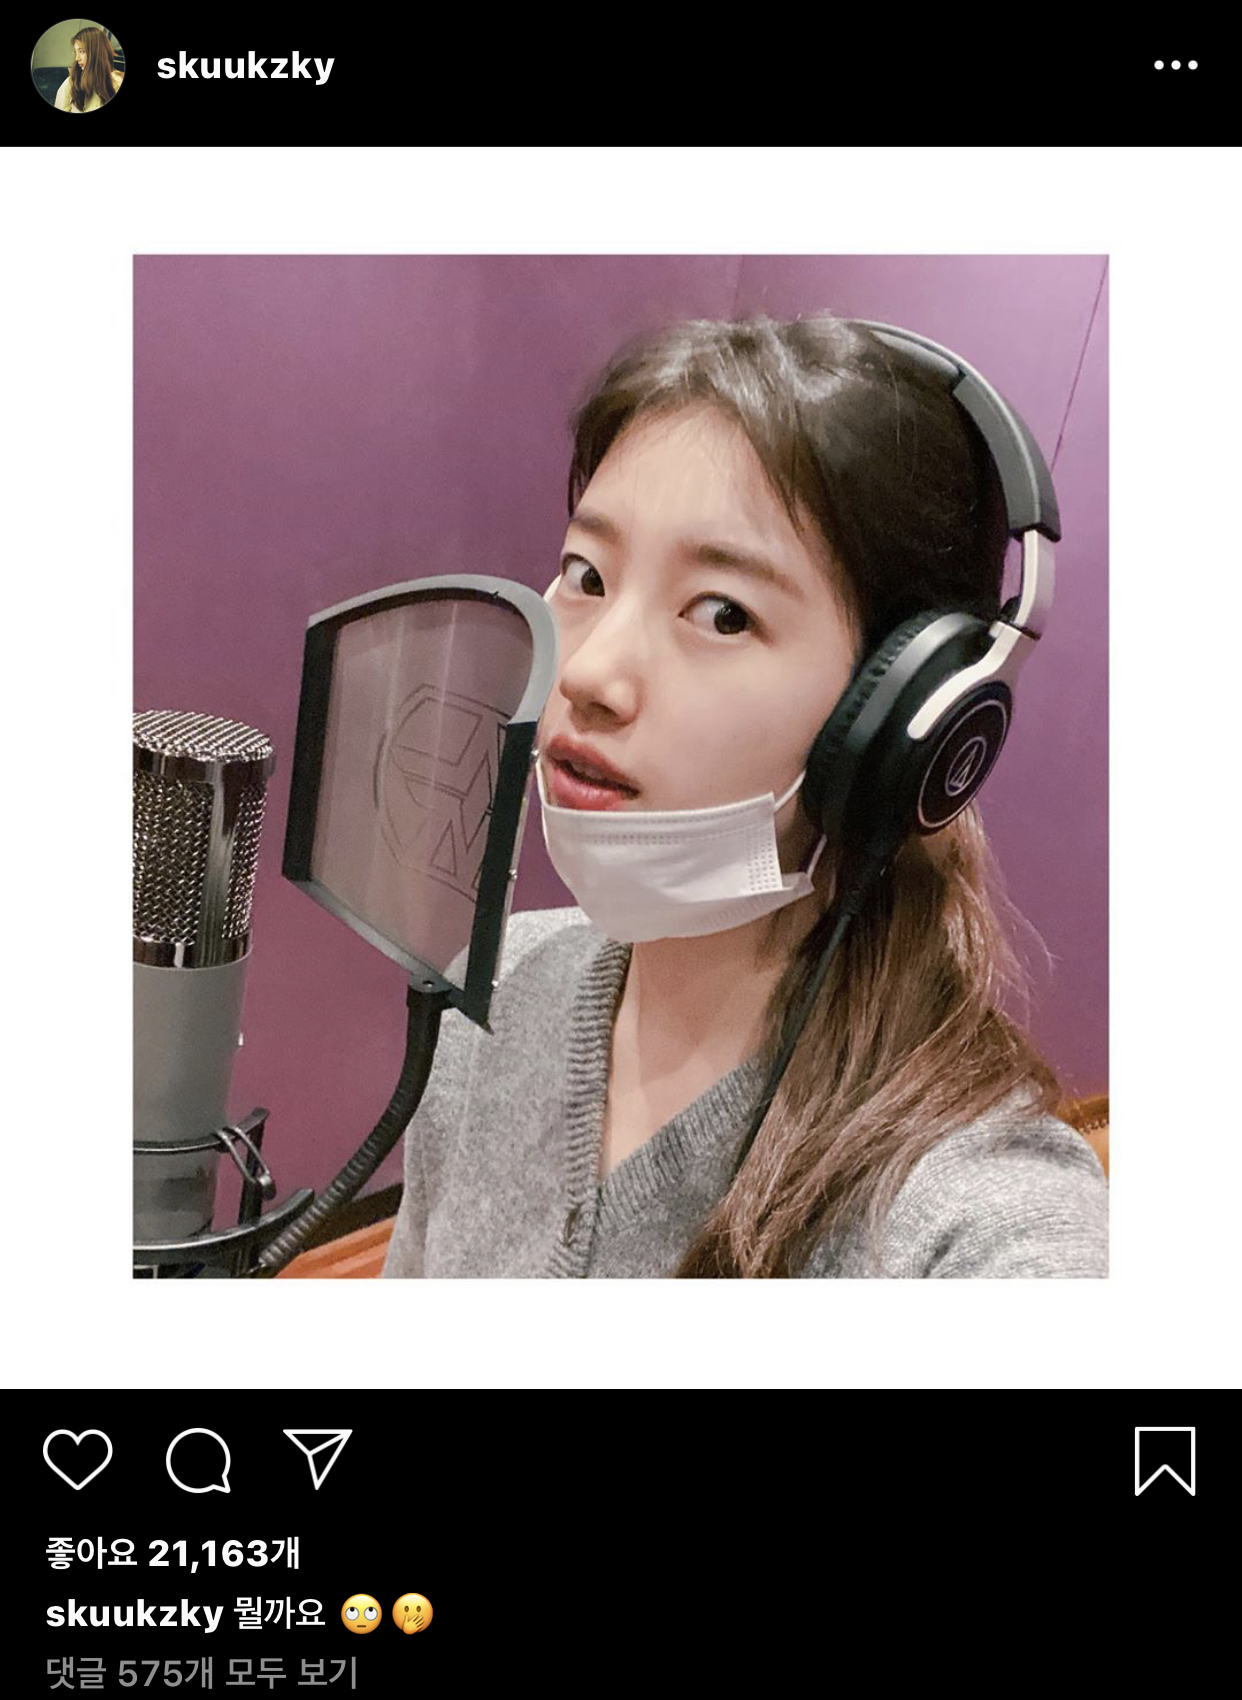 Knetz discuss if Singer and Actress Bae Suzy will sing an OST for her